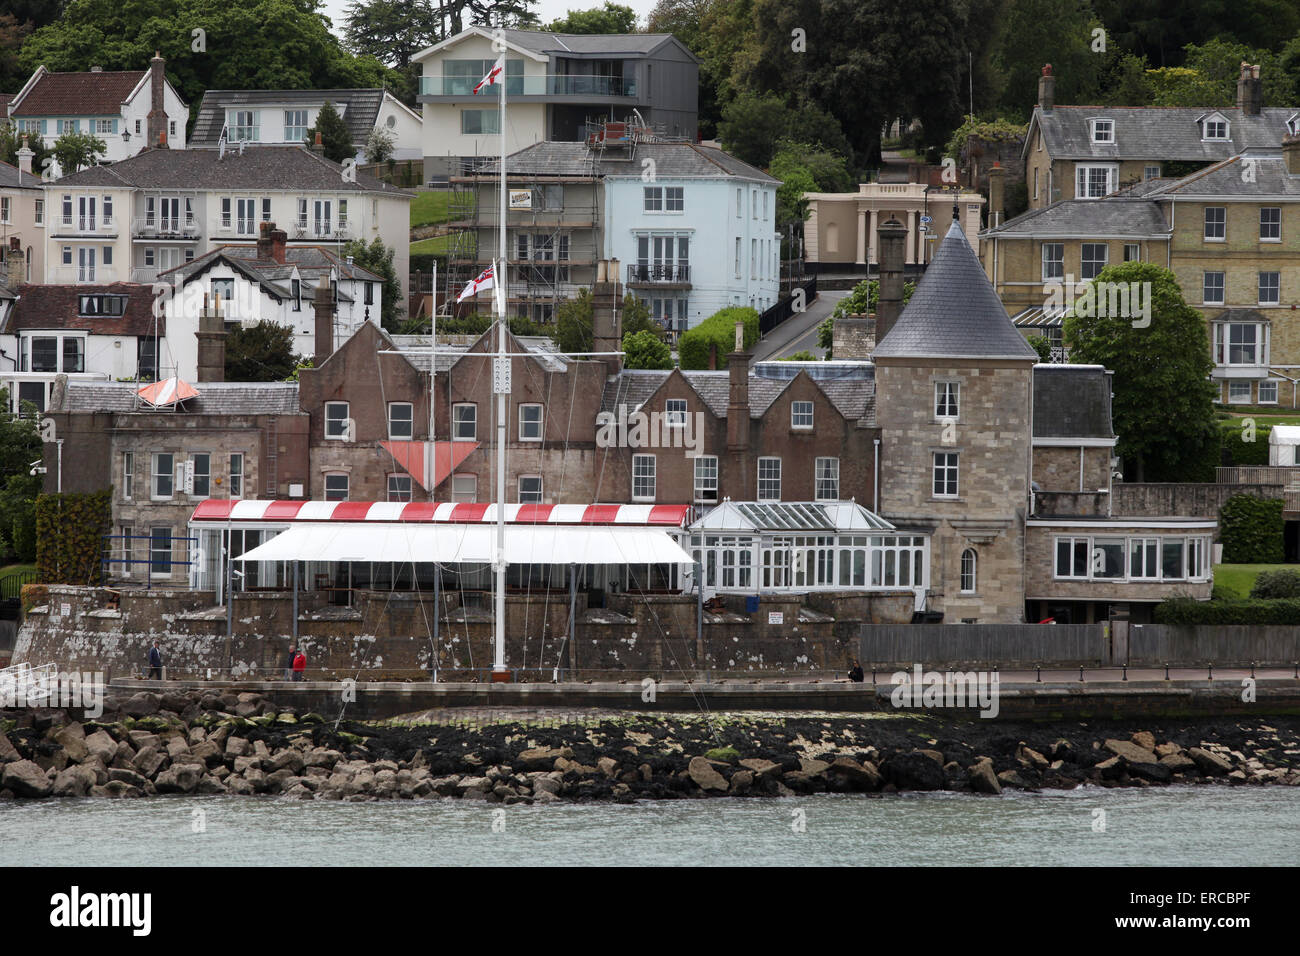 Cowes Royal Yacht Squadron-Yacht-Club am Cowes Castle auf der Isle Of Wight. Stockfoto